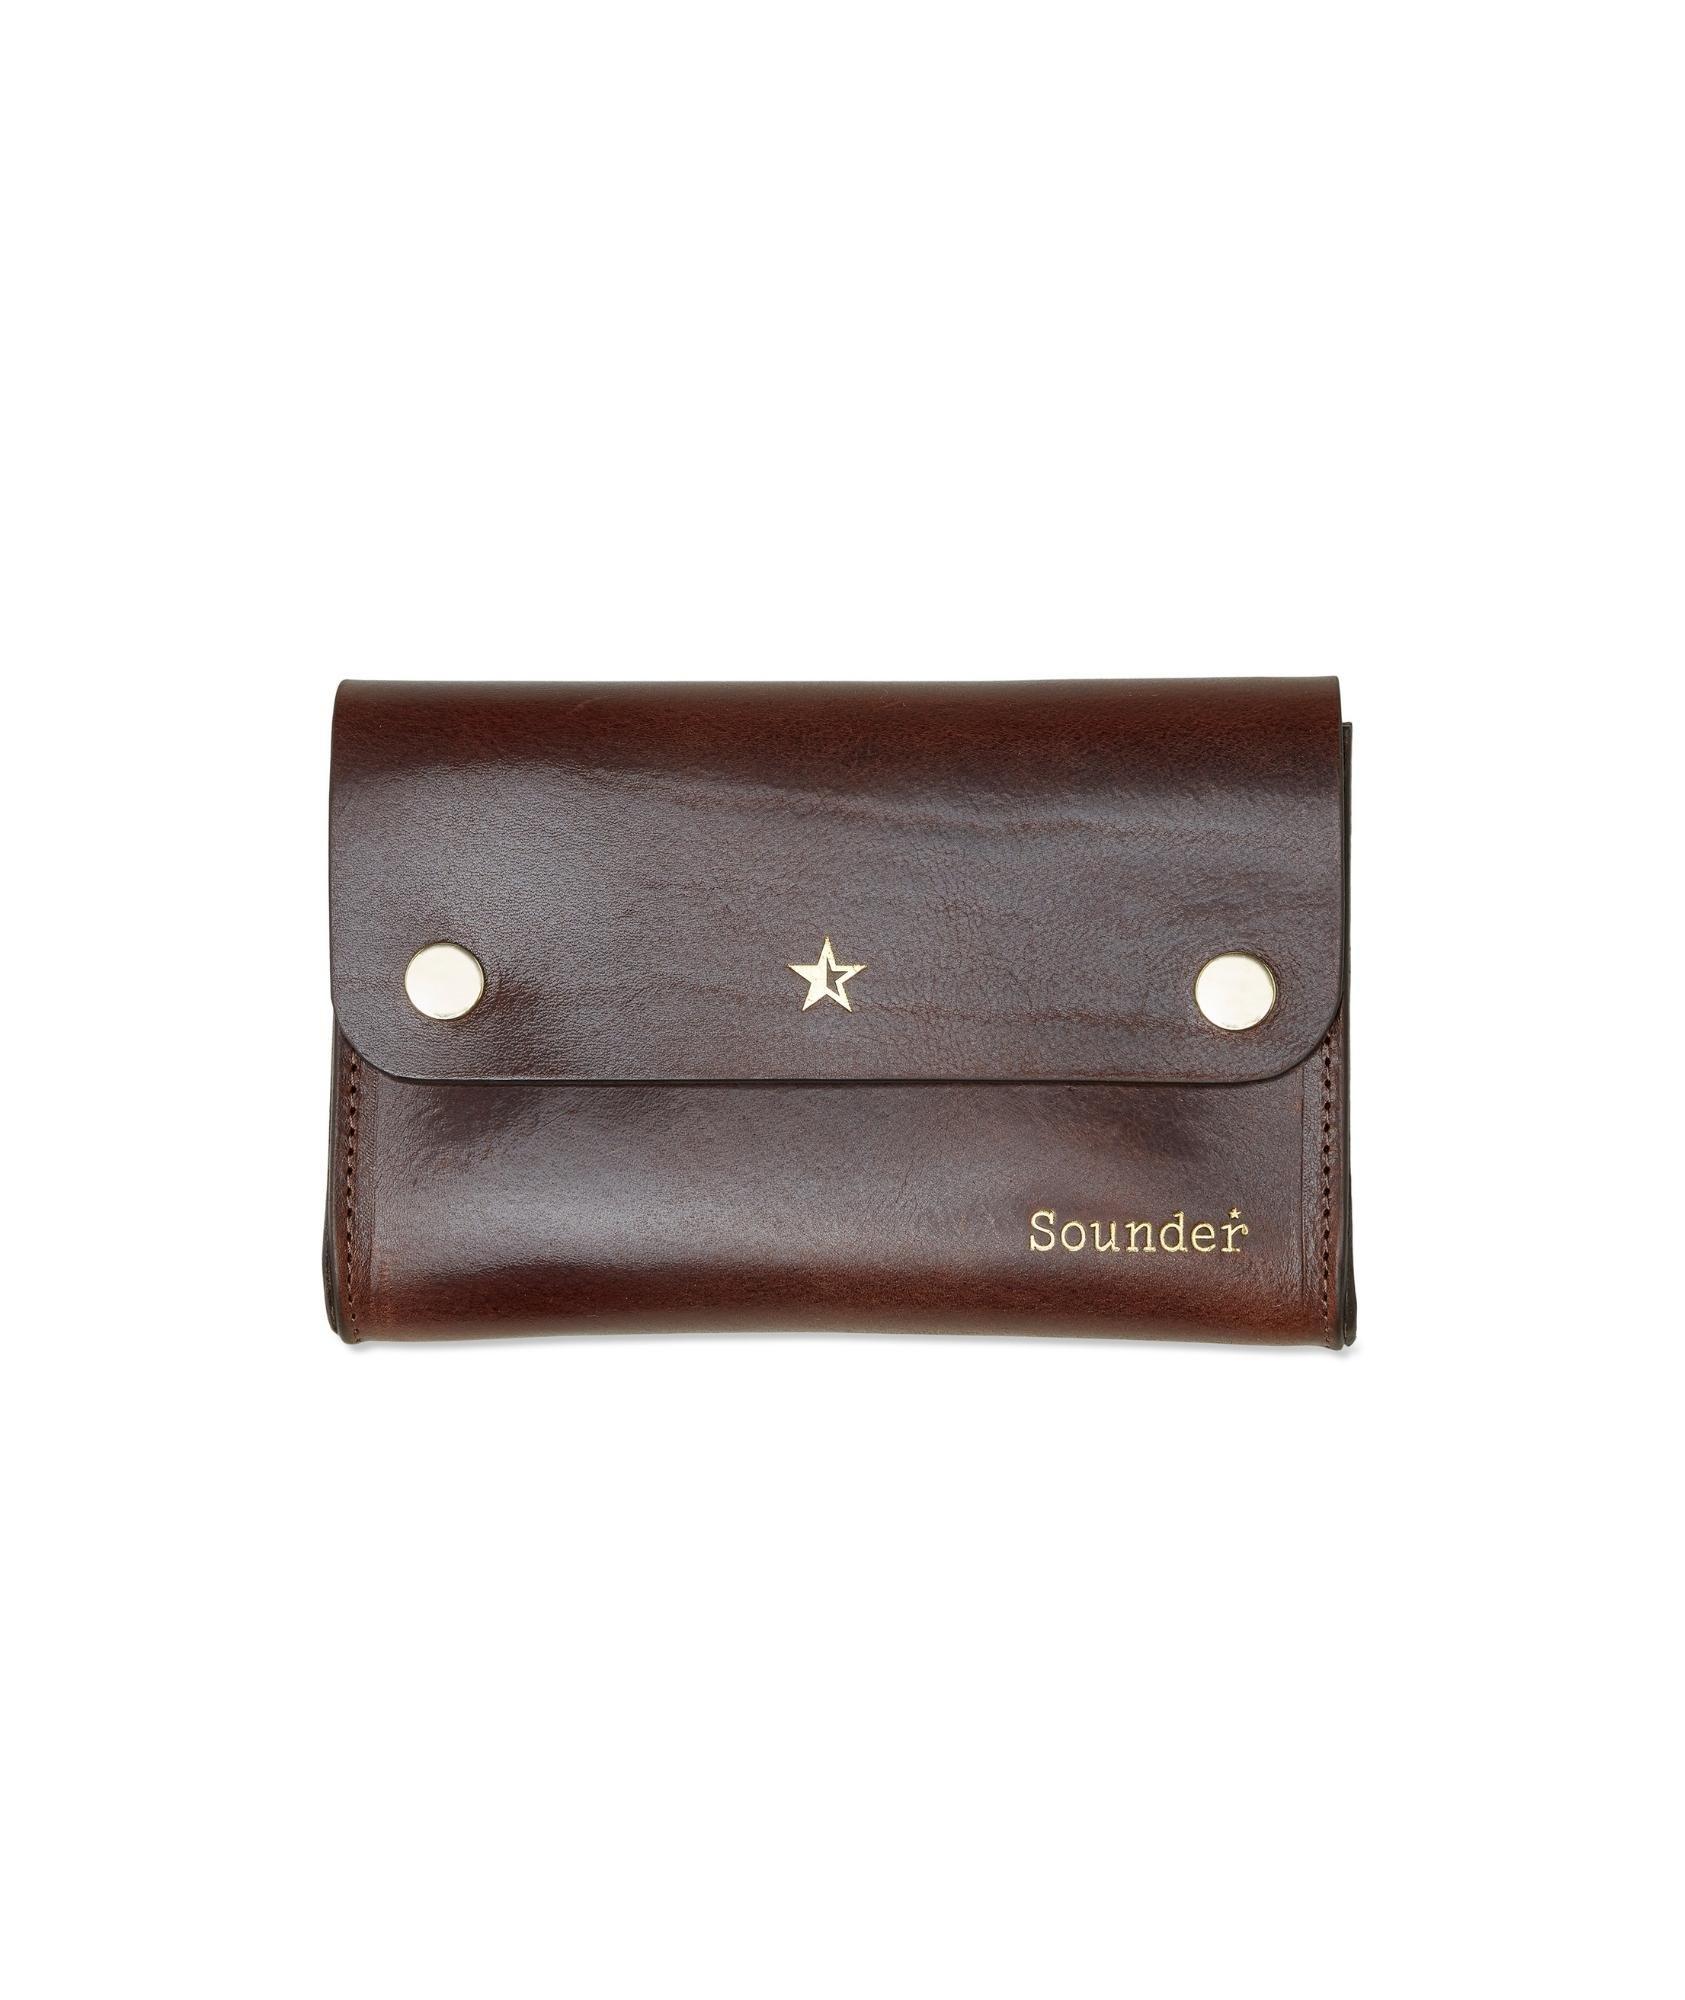 Limited-Edition Tidy Leather Pouch image 0